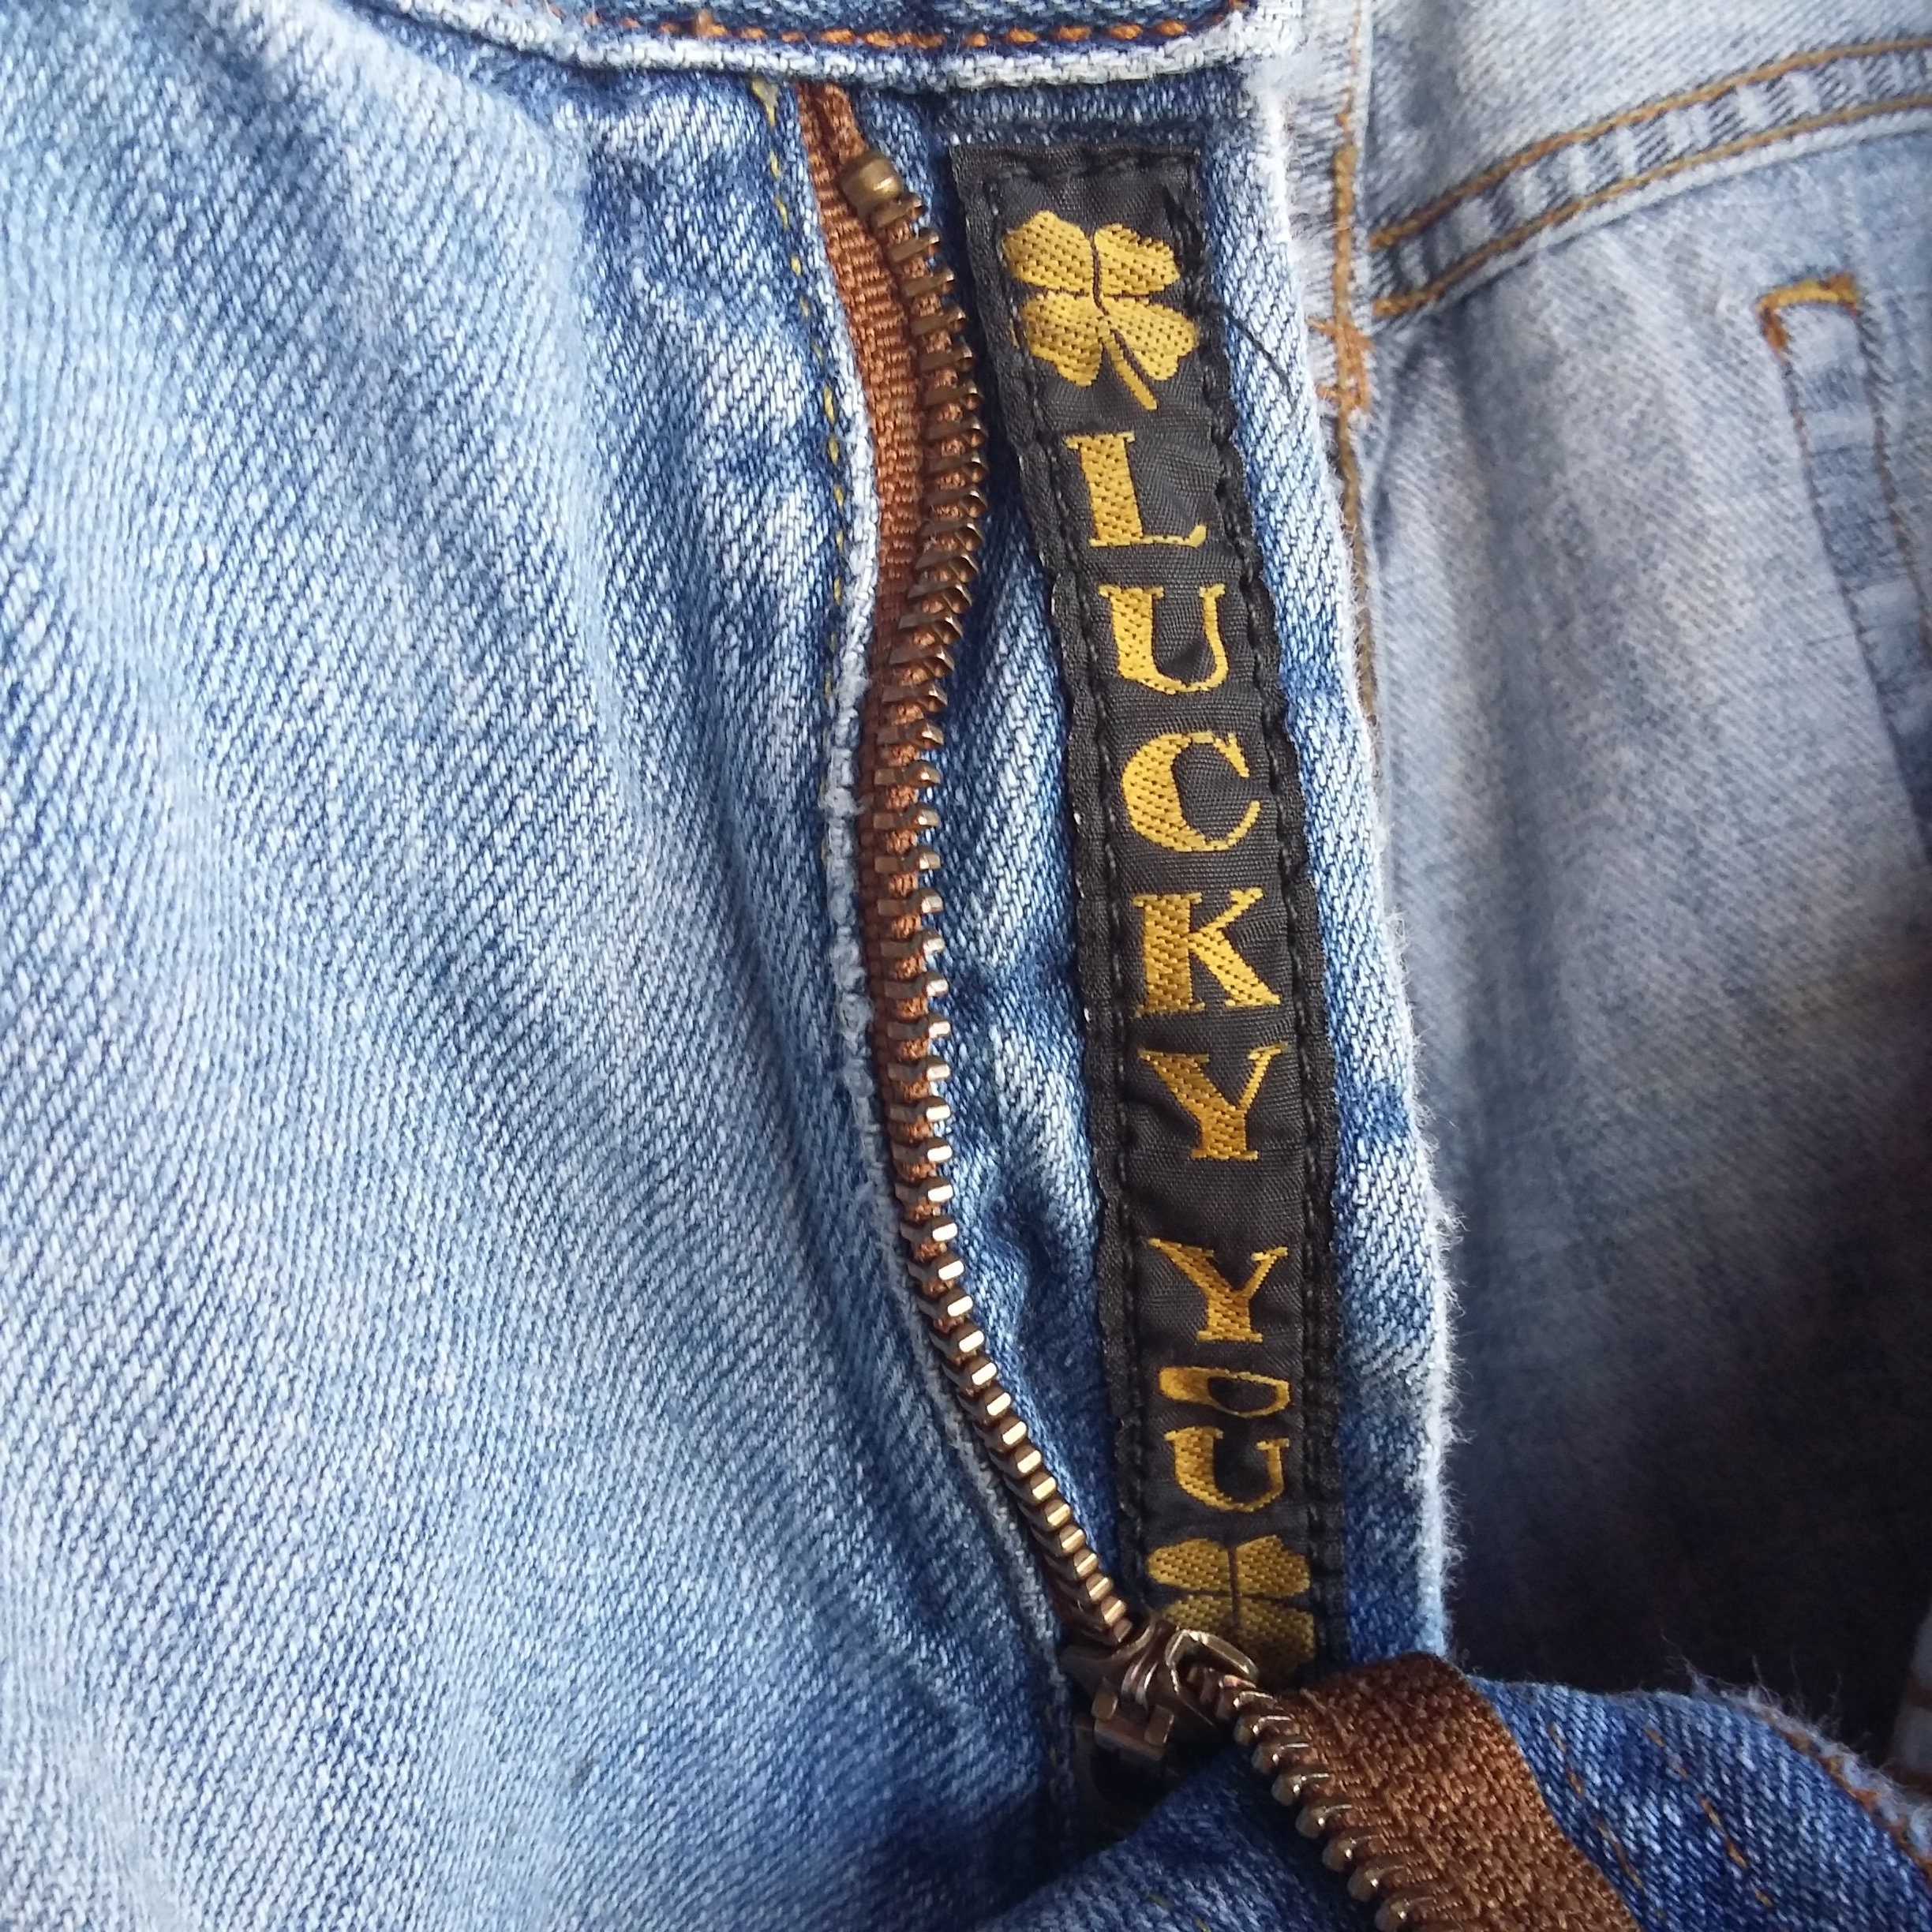 Lucky Jeans Straight Leg Distressed Destroyed 36x30 5 Pocket Zipper Fly  Trashed Holes Worn Stained Stonewashed FREE SHIPPING 